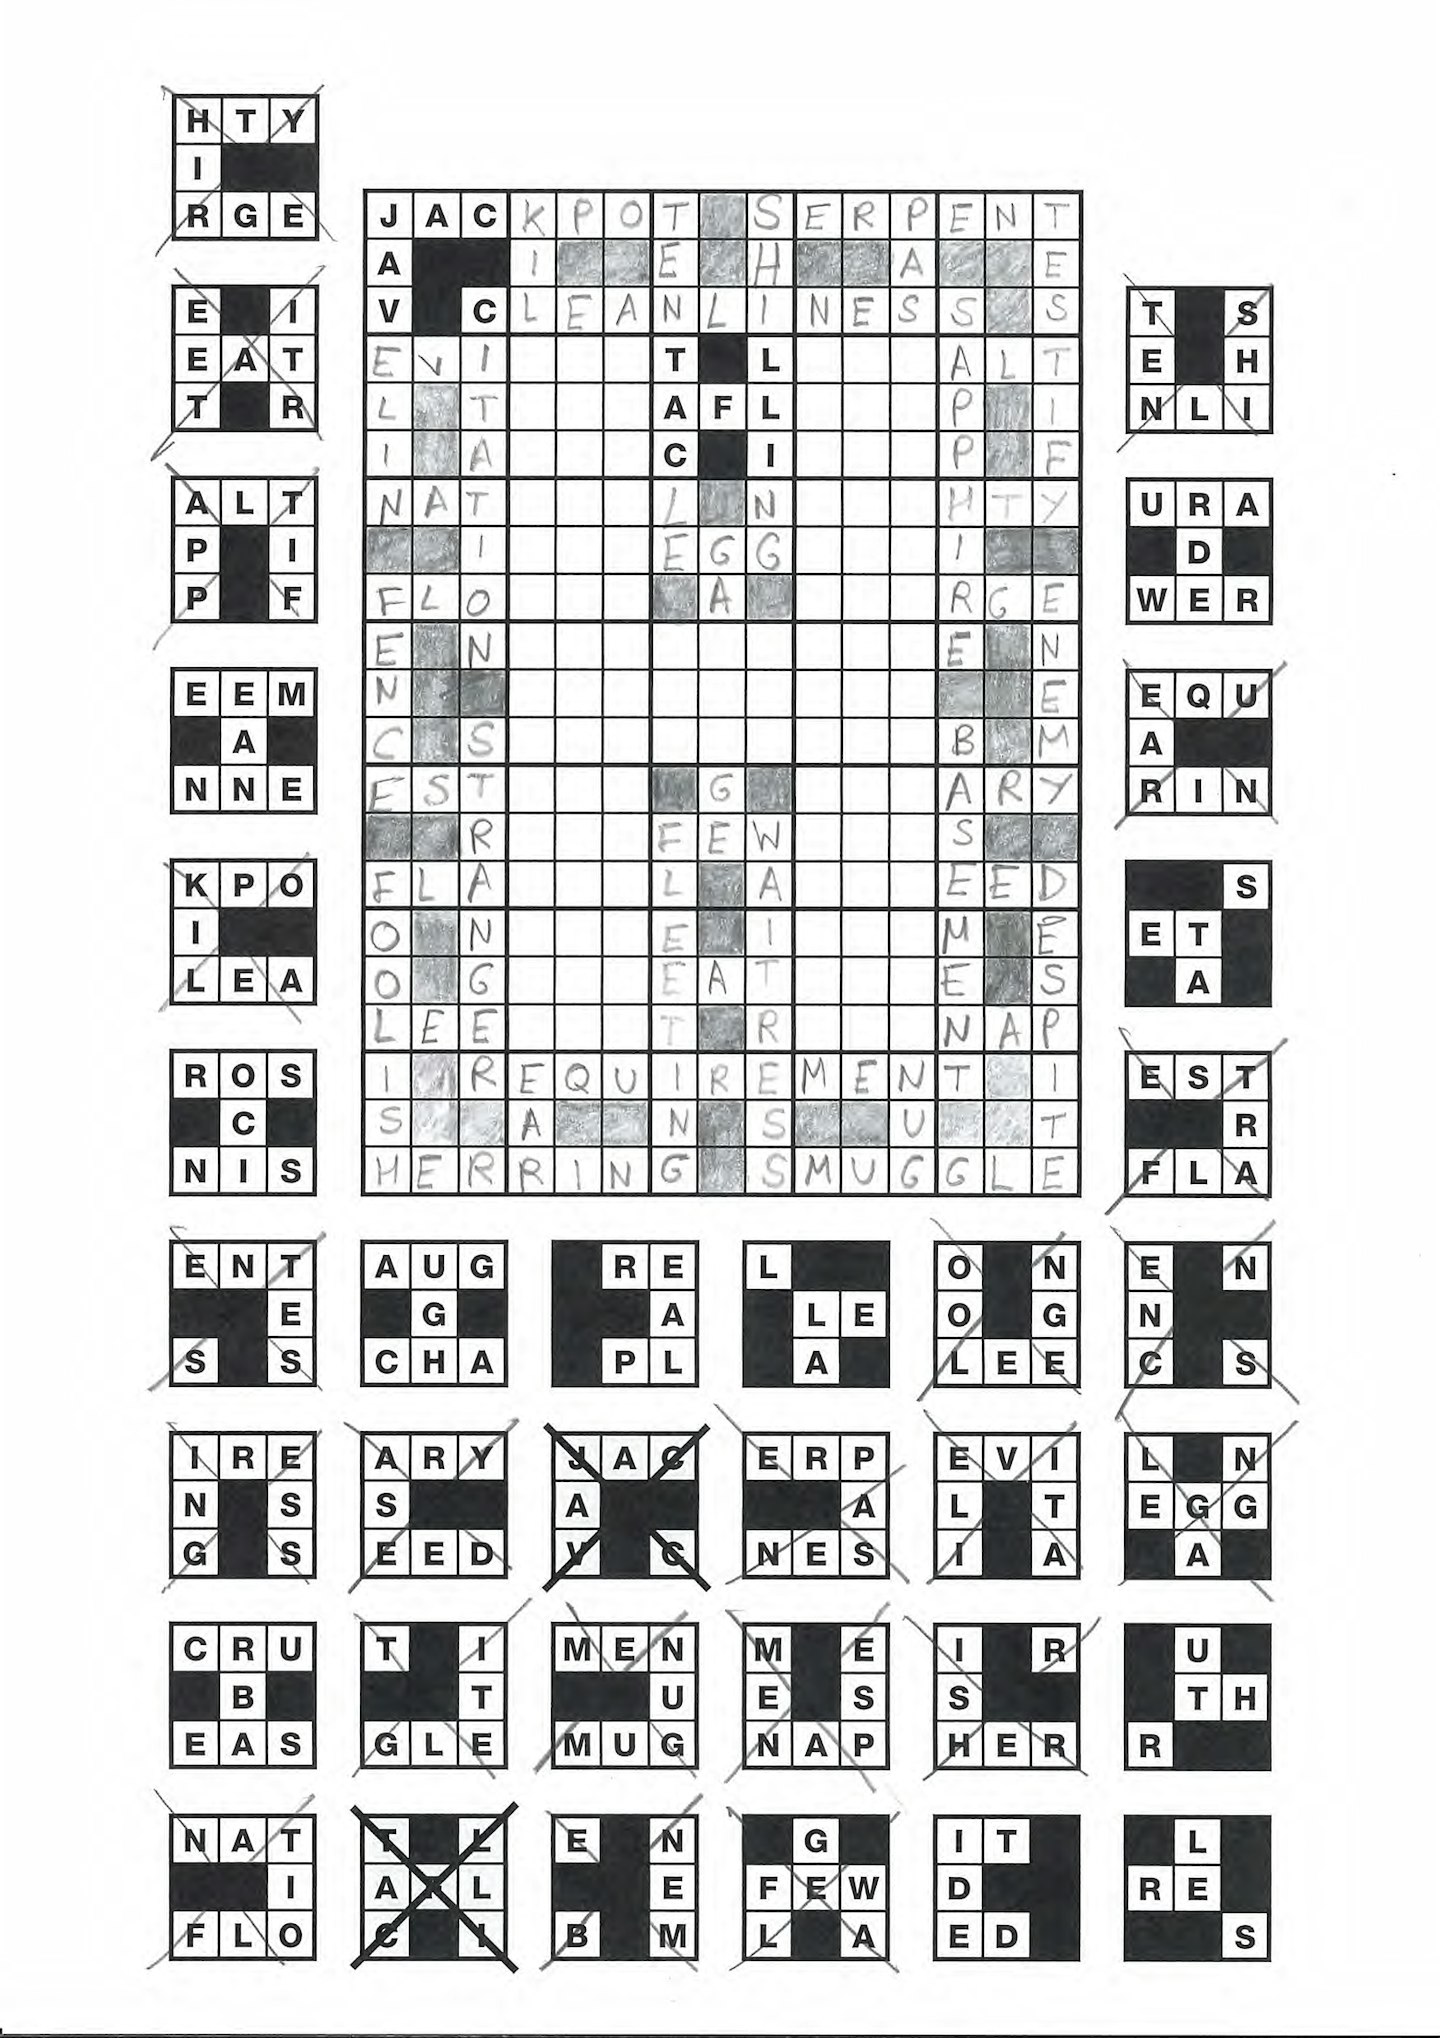 Bits and Pieces example grid 3